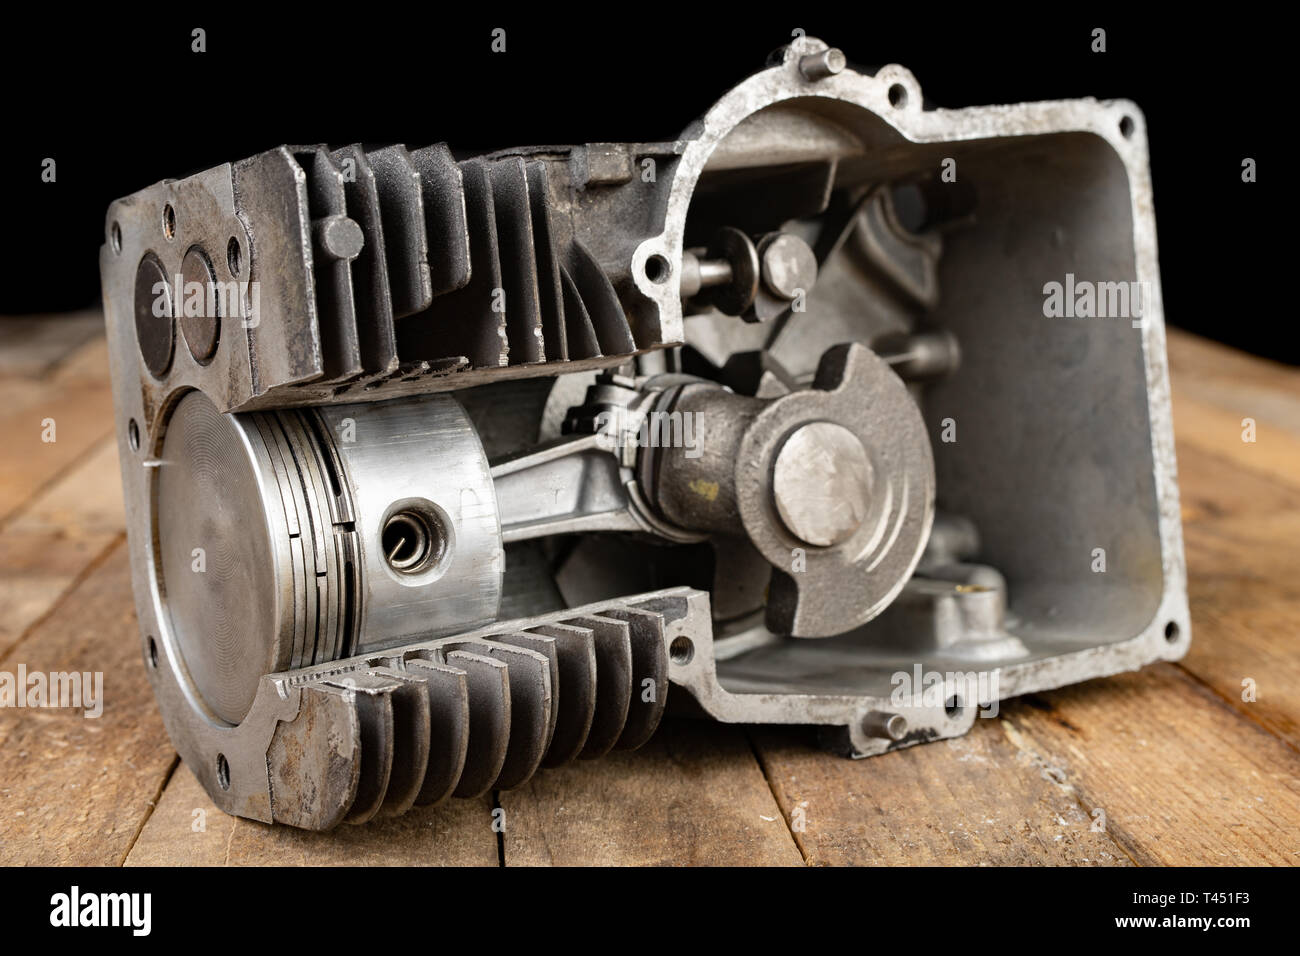 A four-stroke gasoline engine in section. The interior of a single-cylinder internal combustion engine. Dark background. Stock Photo